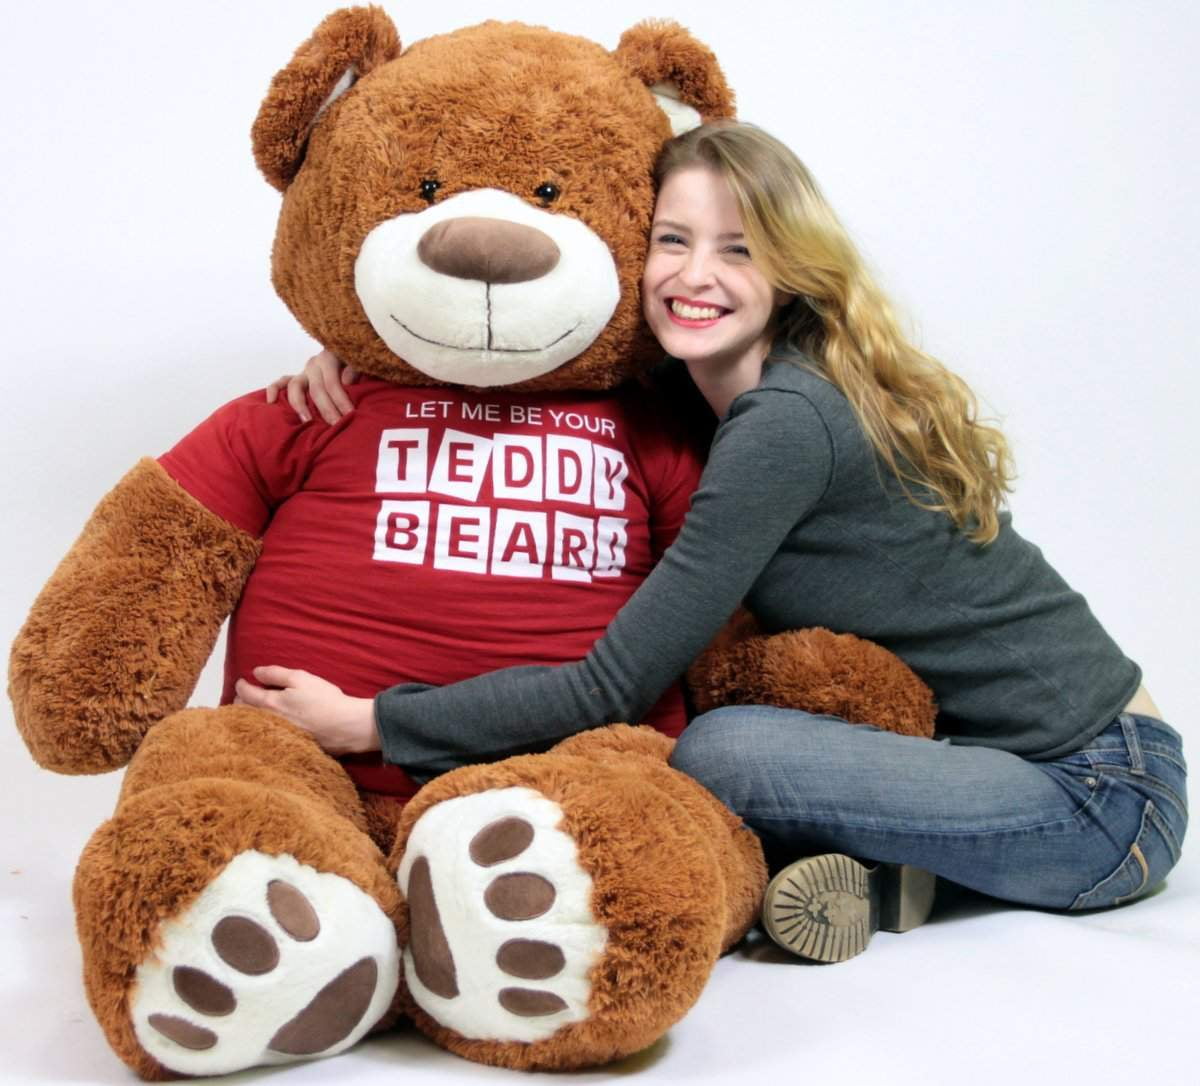 You Are Special Giant Teddy Bear Five Feet Tall Soft Tshirt Says YOU ARE SPECIAL 